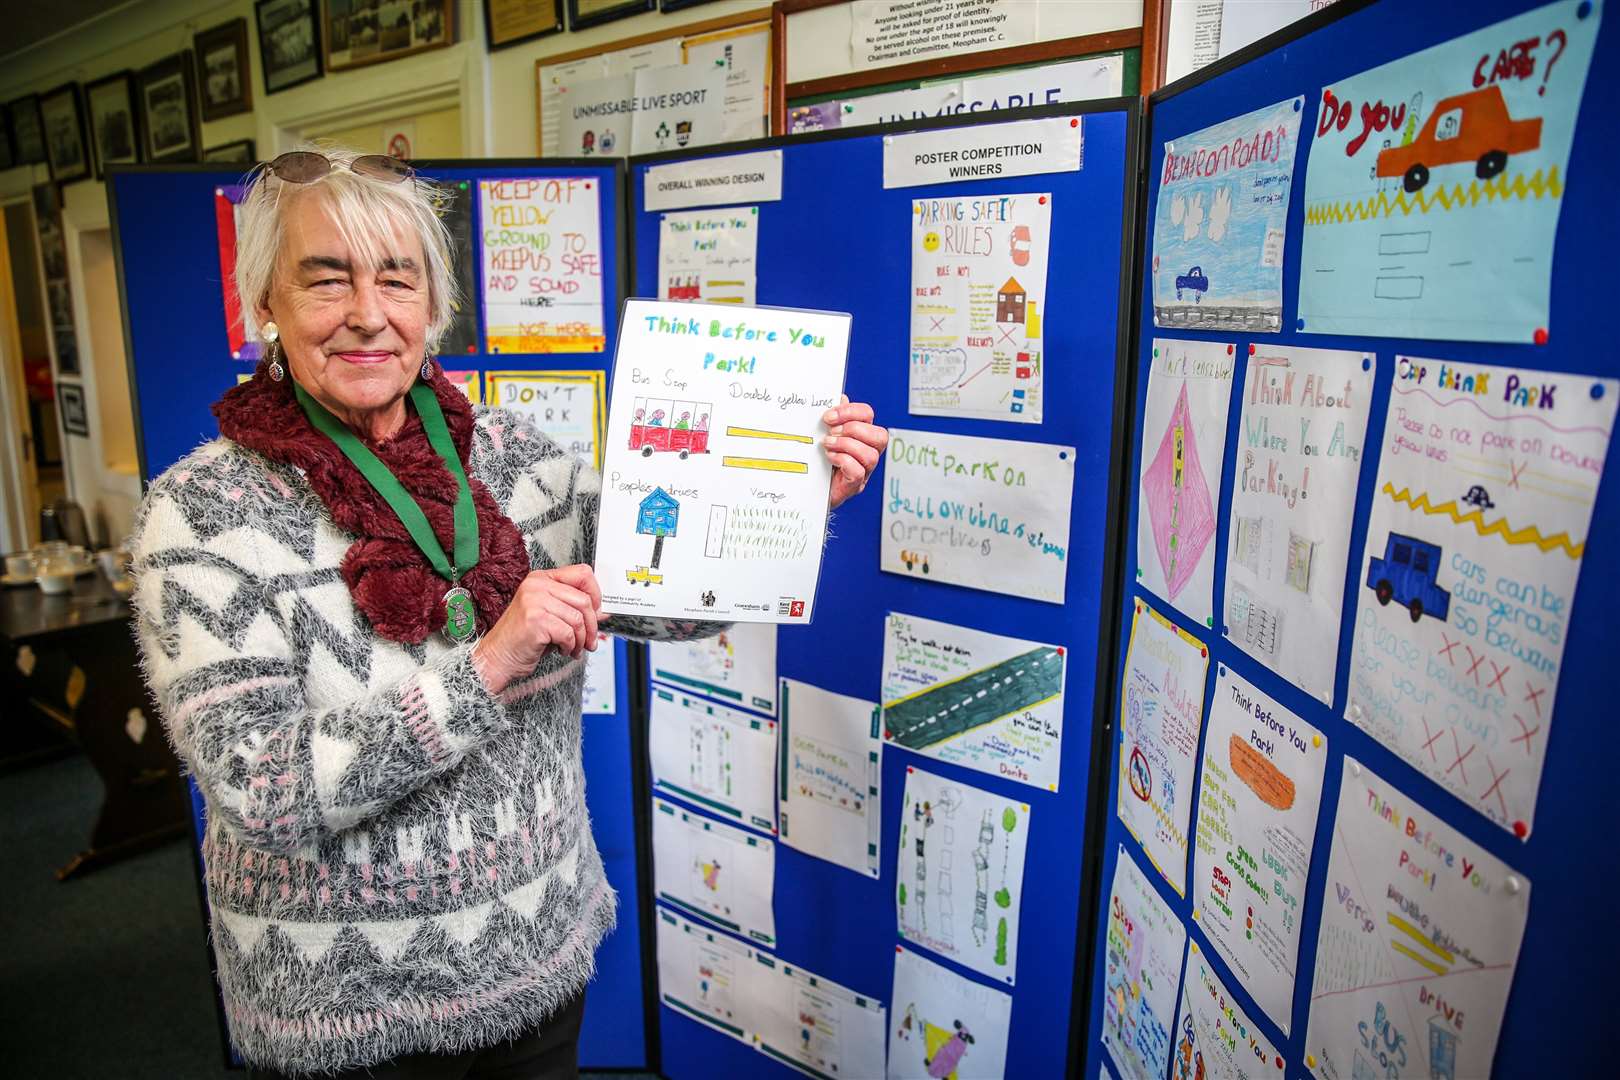 Chairman of Meopham Parish Council Sheila Buchanan with the winning poster design for the parking safety campaign and others from Meopham school children.